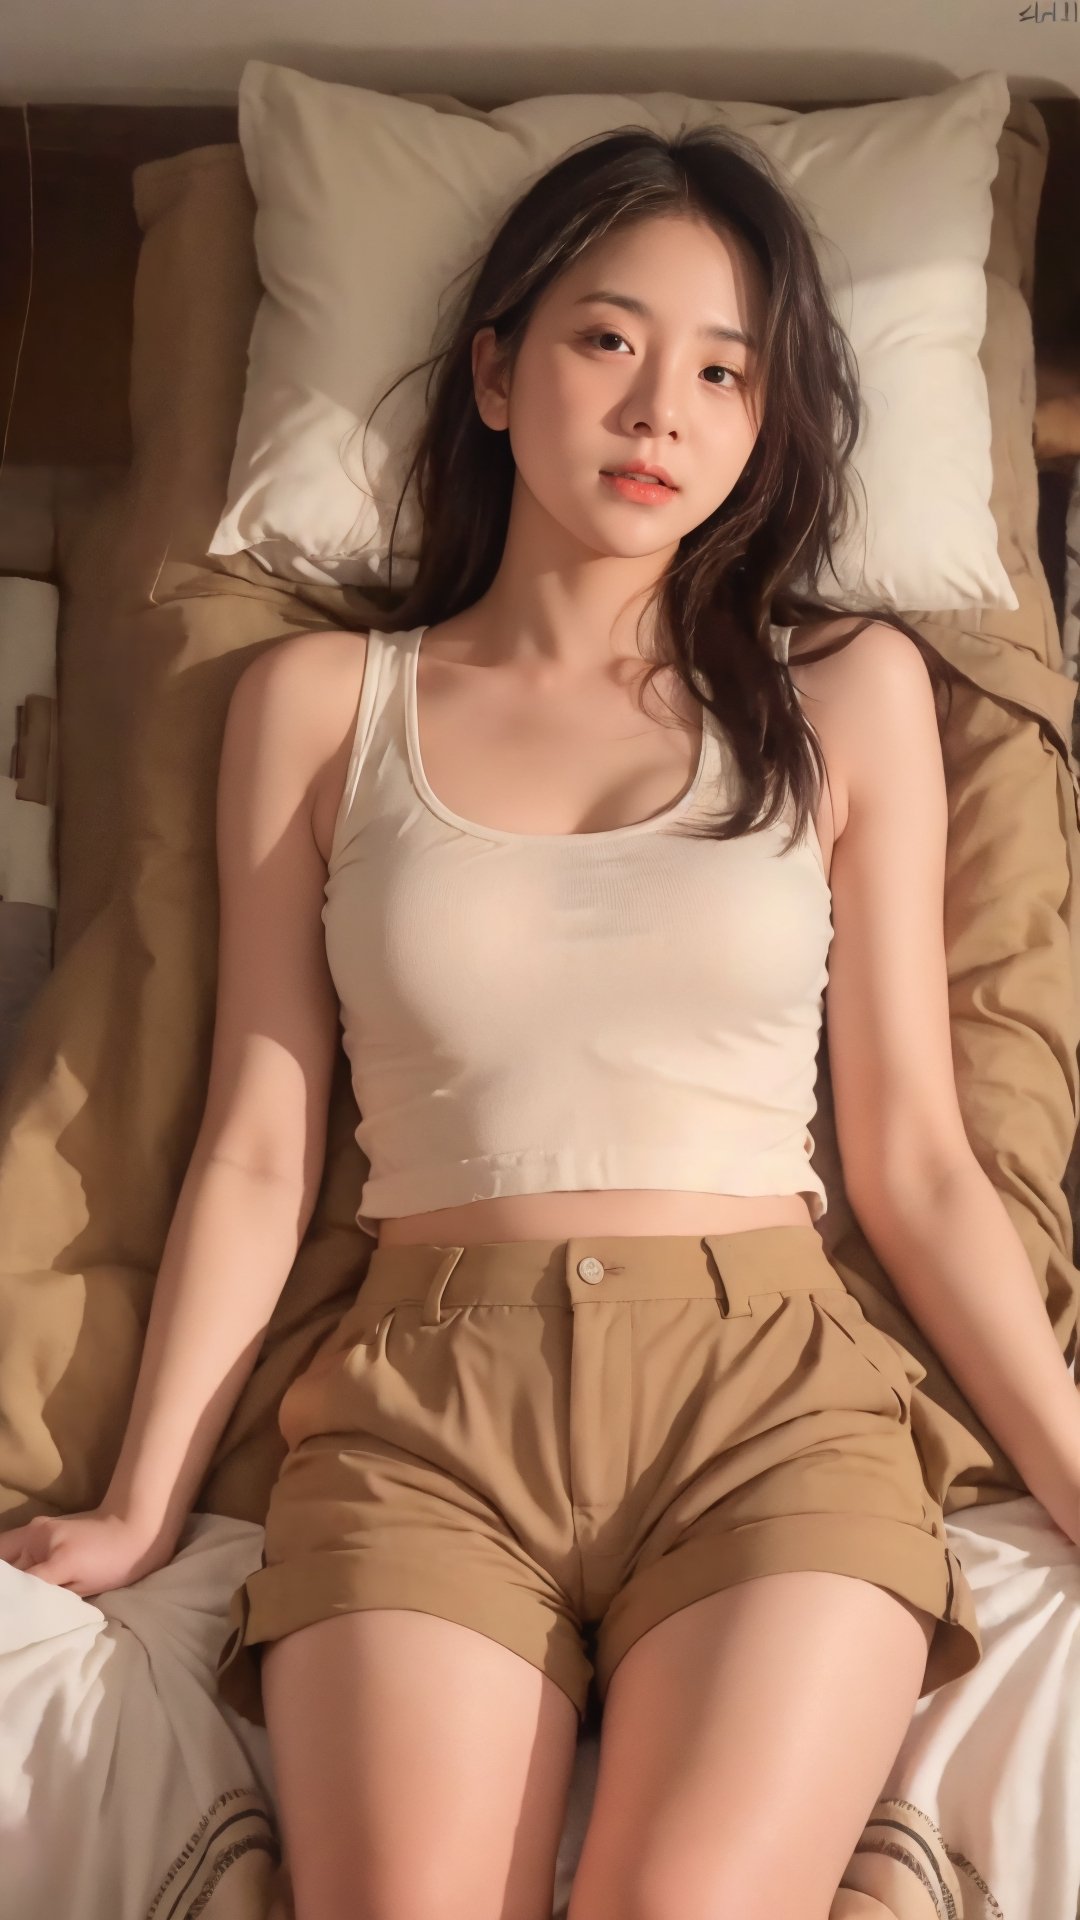 An Indonesian Woman Lie on the bed, Photorealistic, High Quality, Photoshoot pose, missionary, lying, Tank top, short pants, grabbing hands